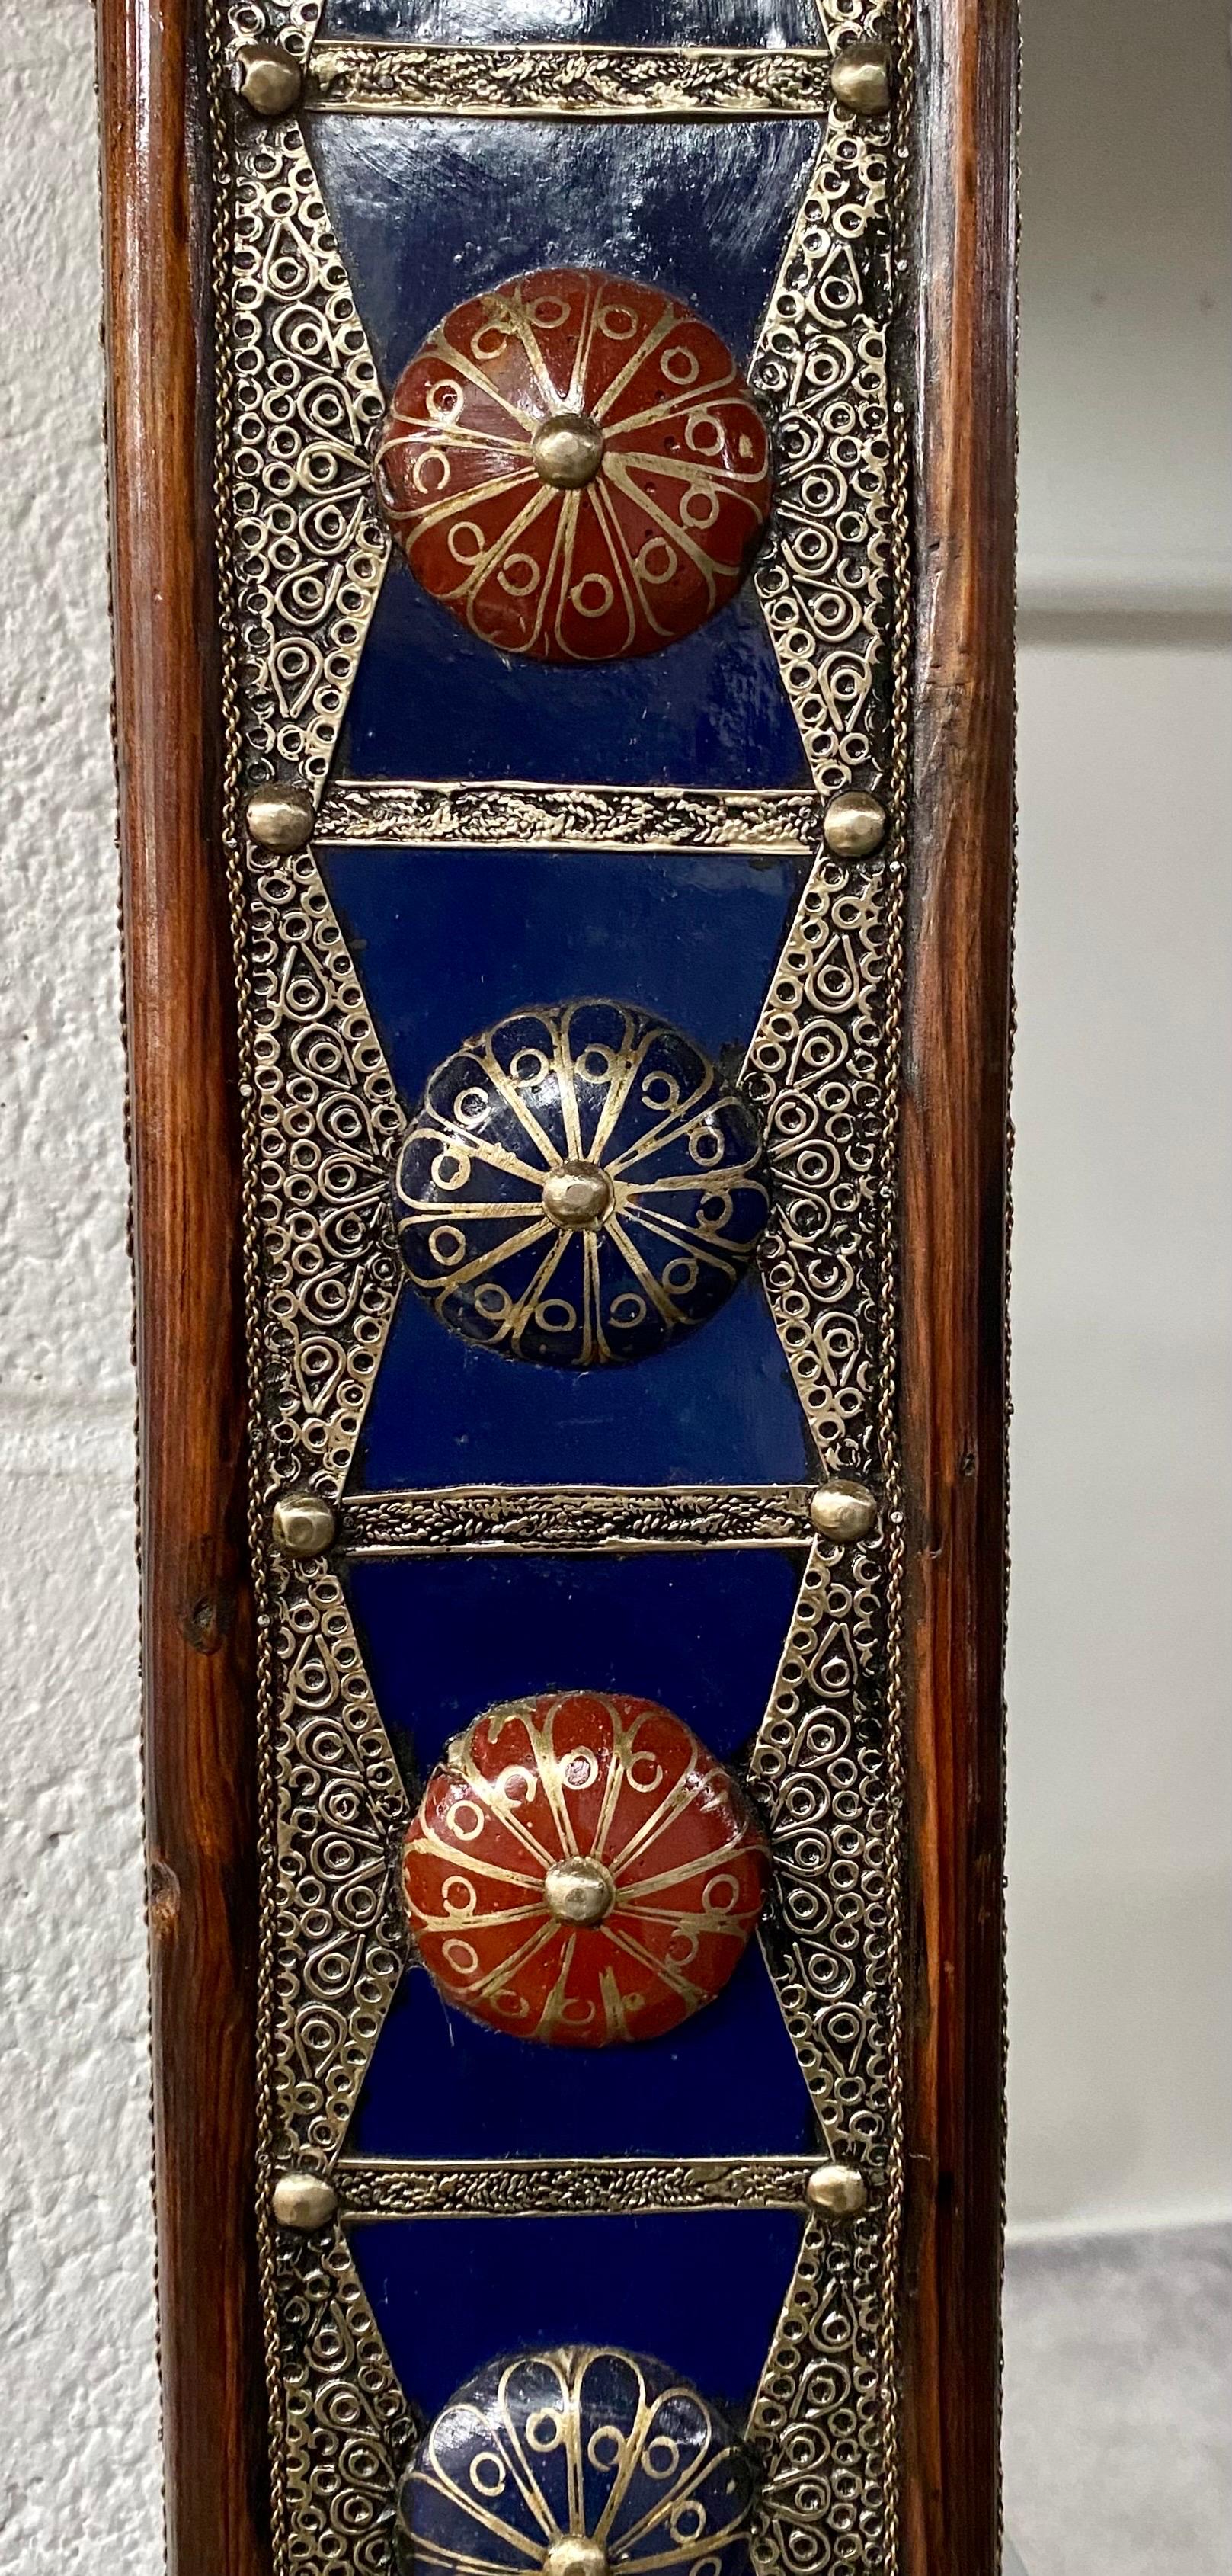 A majestic handcrafted Hollywood Regency style with Moorish flair mirror made of wood and painted in cobalt blue with bronze inlay and embellished with natural stones in blue and red. The handmade mirror is a wonderful creation by master artisans in